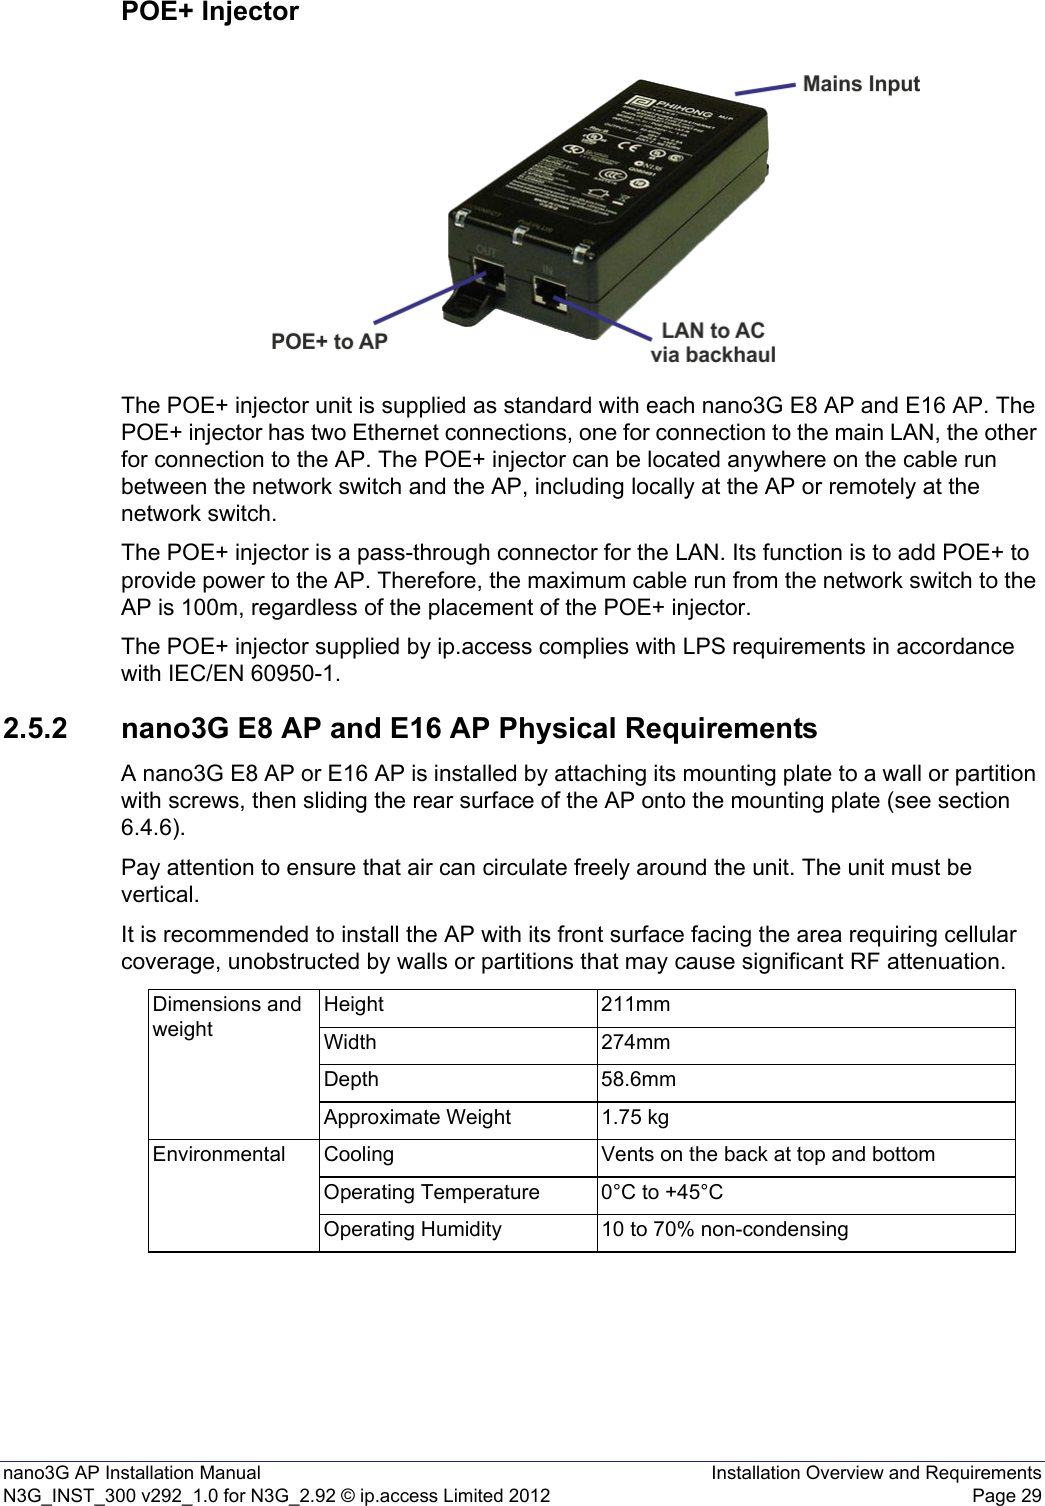 nano3G AP Installation Manual Installation Overview and RequirementsN3G_INST_300 v292_1.0 for N3G_2.92 © ip.access Limited 2012 Page 29POE+ InjectorThe POE+ injector unit is supplied as standard with each nano3G E8 AP and E16 AP. The POE+ injector has two Ethernet connections, one for connection to the main LAN, the other for connection to the AP. The POE+ injector can be located anywhere on the cable run between the network switch and the AP, including locally at the AP or remotely at the network switch.The POE+ injector is a pass-through connector for the LAN. Its function is to add POE+ to provide power to the AP. Therefore, the maximum cable run from the network switch to the AP is 100m, regardless of the placement of the POE+ injector.The POE+ injector supplied by ip.access complies with LPS requirements in accordance with IEC/EN 60950-1.2.5.2 nano3G E8 AP and E16 AP Physical RequirementsA nano3G E8 AP or E16 AP is installed by attaching its mounting plate to a wall or partition with screws, then sliding the rear surface of the AP onto the mounting plate (see section 6.4.6).Pay attention to ensure that air can circulate freely around the unit. The unit must be vertical.It is recommended to install the AP with its front surface facing the area requiring cellular coverage, unobstructed by walls or partitions that may cause significant RF attenuation.Dimensions and weightHeight 211mmWidth 274mmDepth 58.6mmApproximate Weight 1.75 kgEnvironmental Cooling Vents on the back at top and bottomOperating Temperature 0°C to +45°COperating Humidity 10 to 70% non-condensing